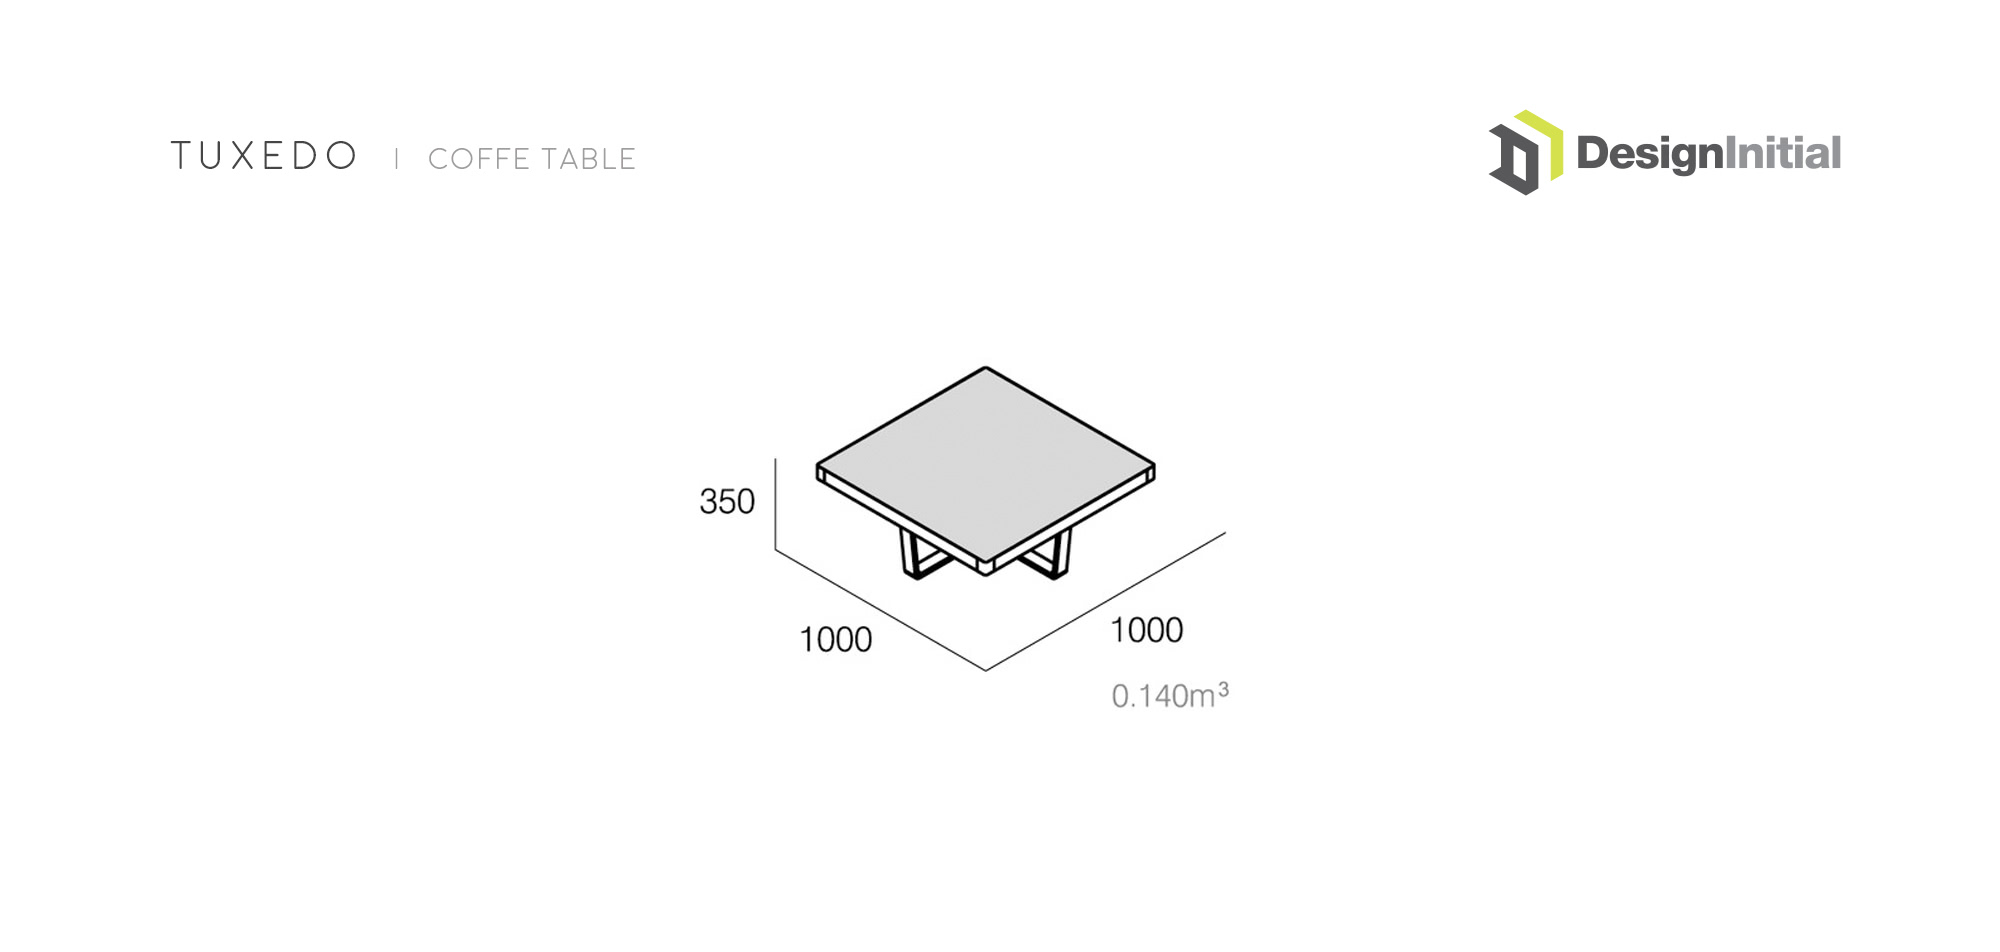 Tuxedo Coffee Table Specifications